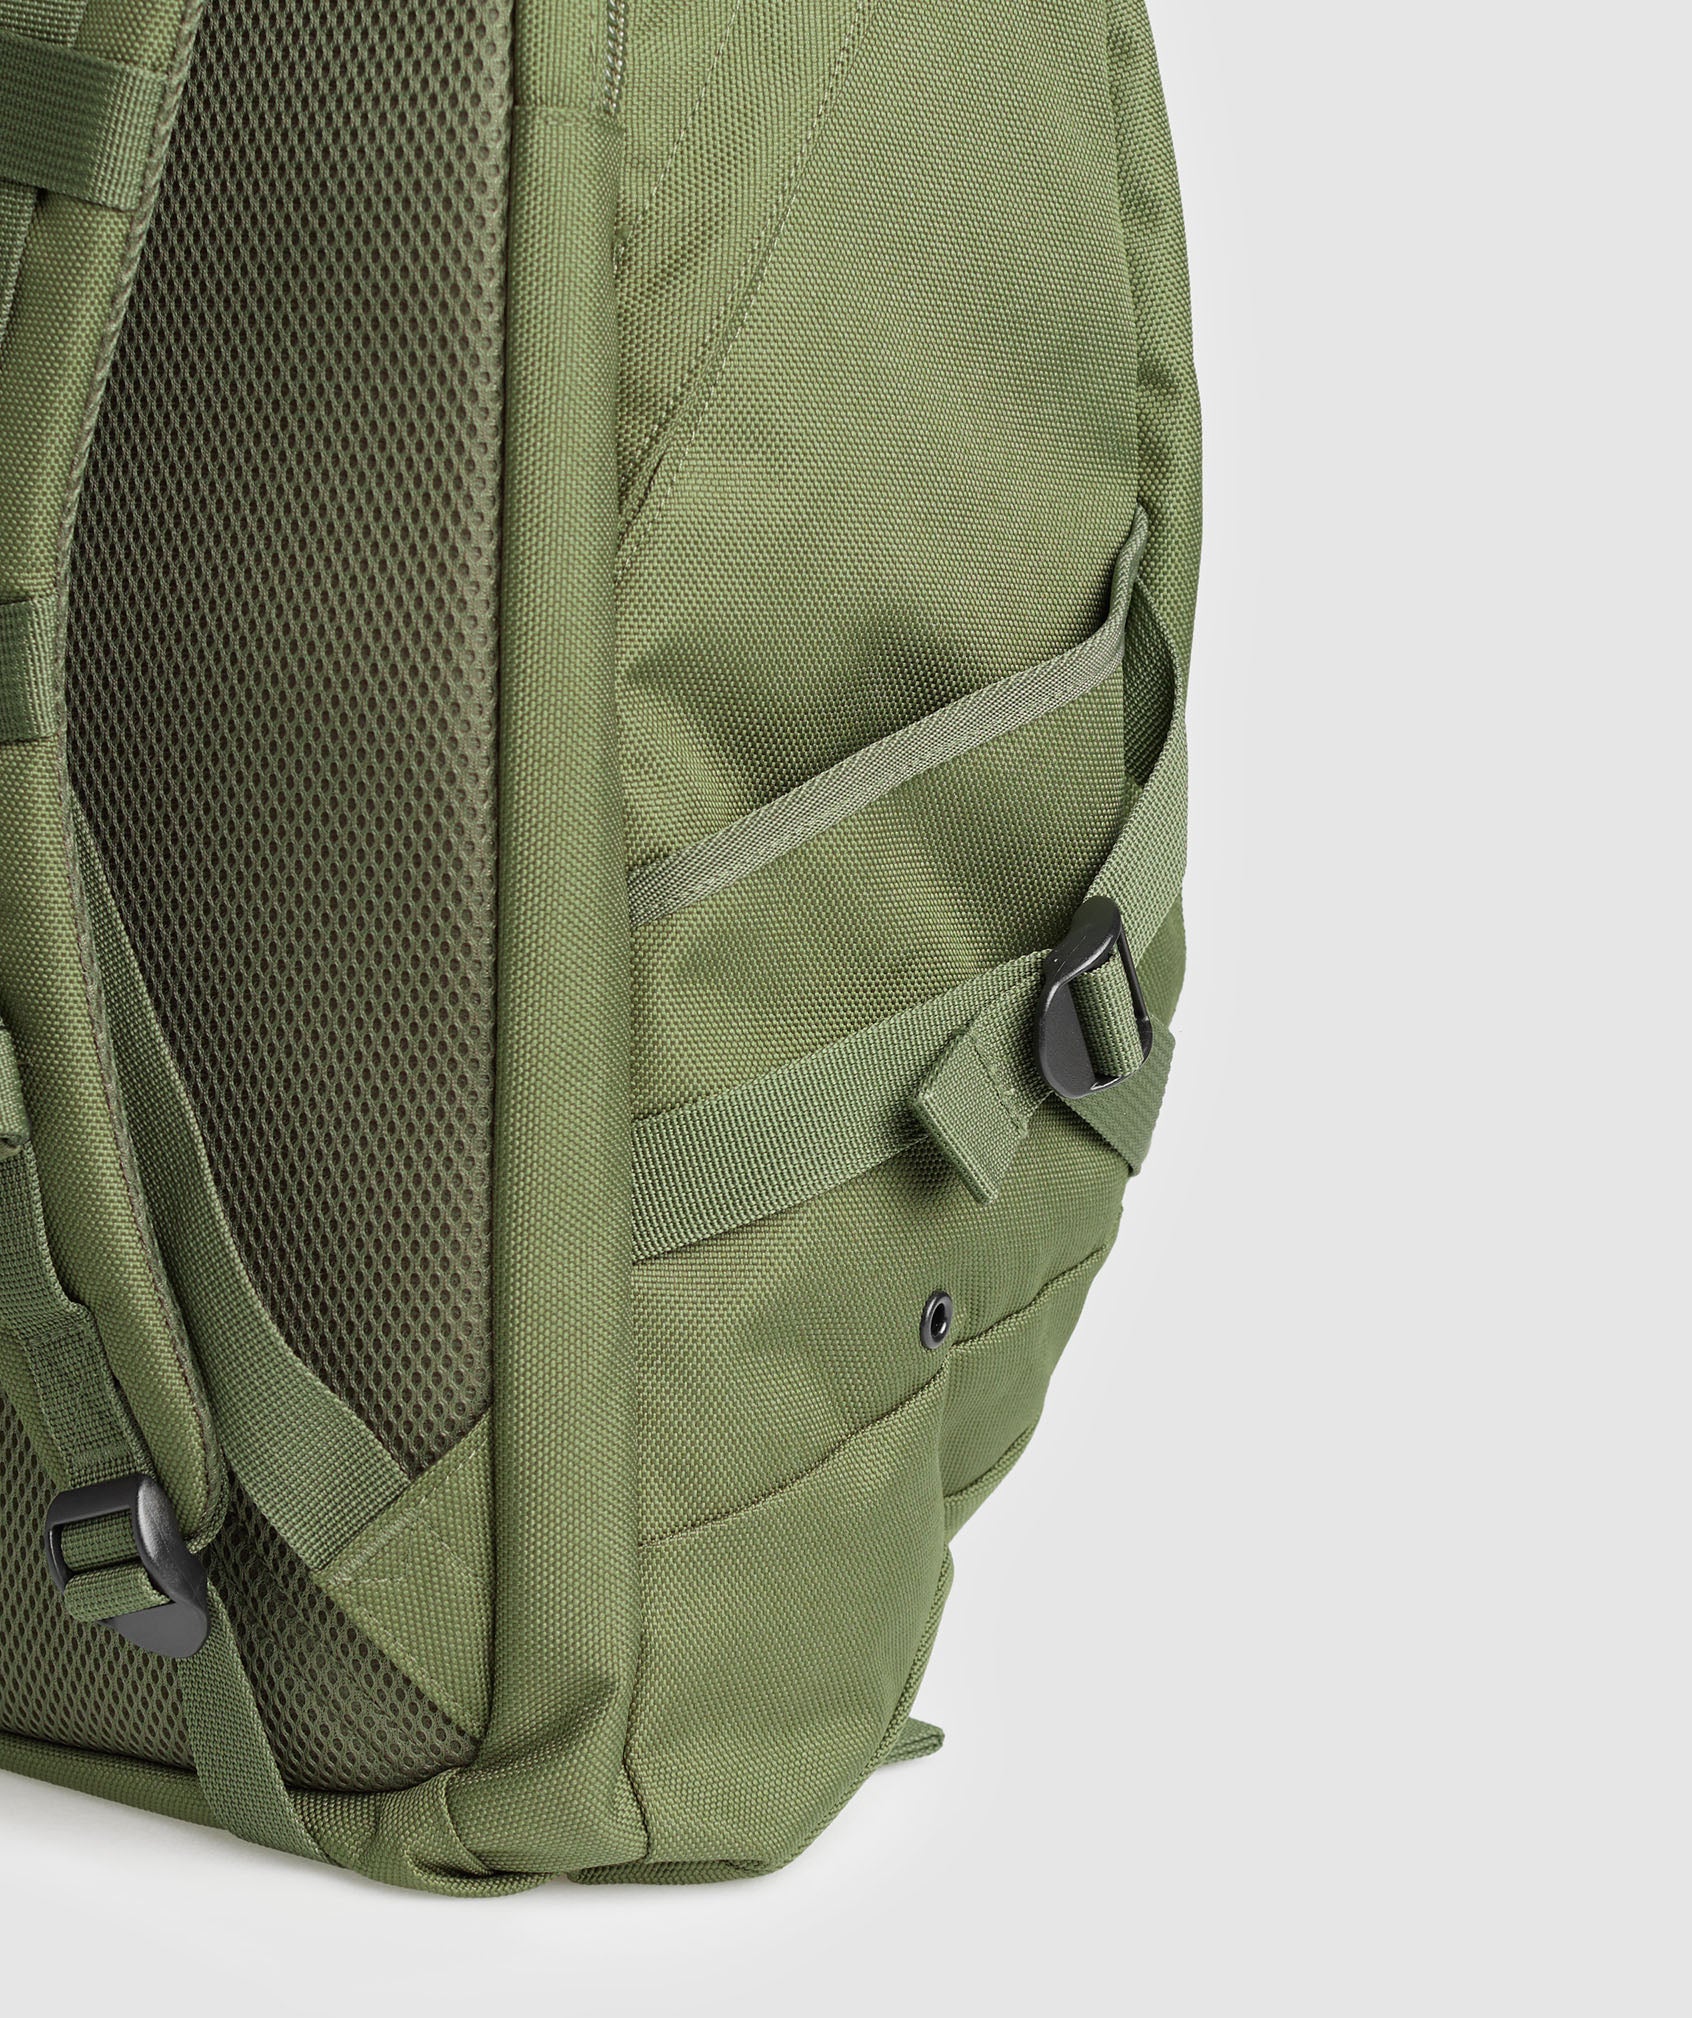 Pursuit Backpack in Green - view 3